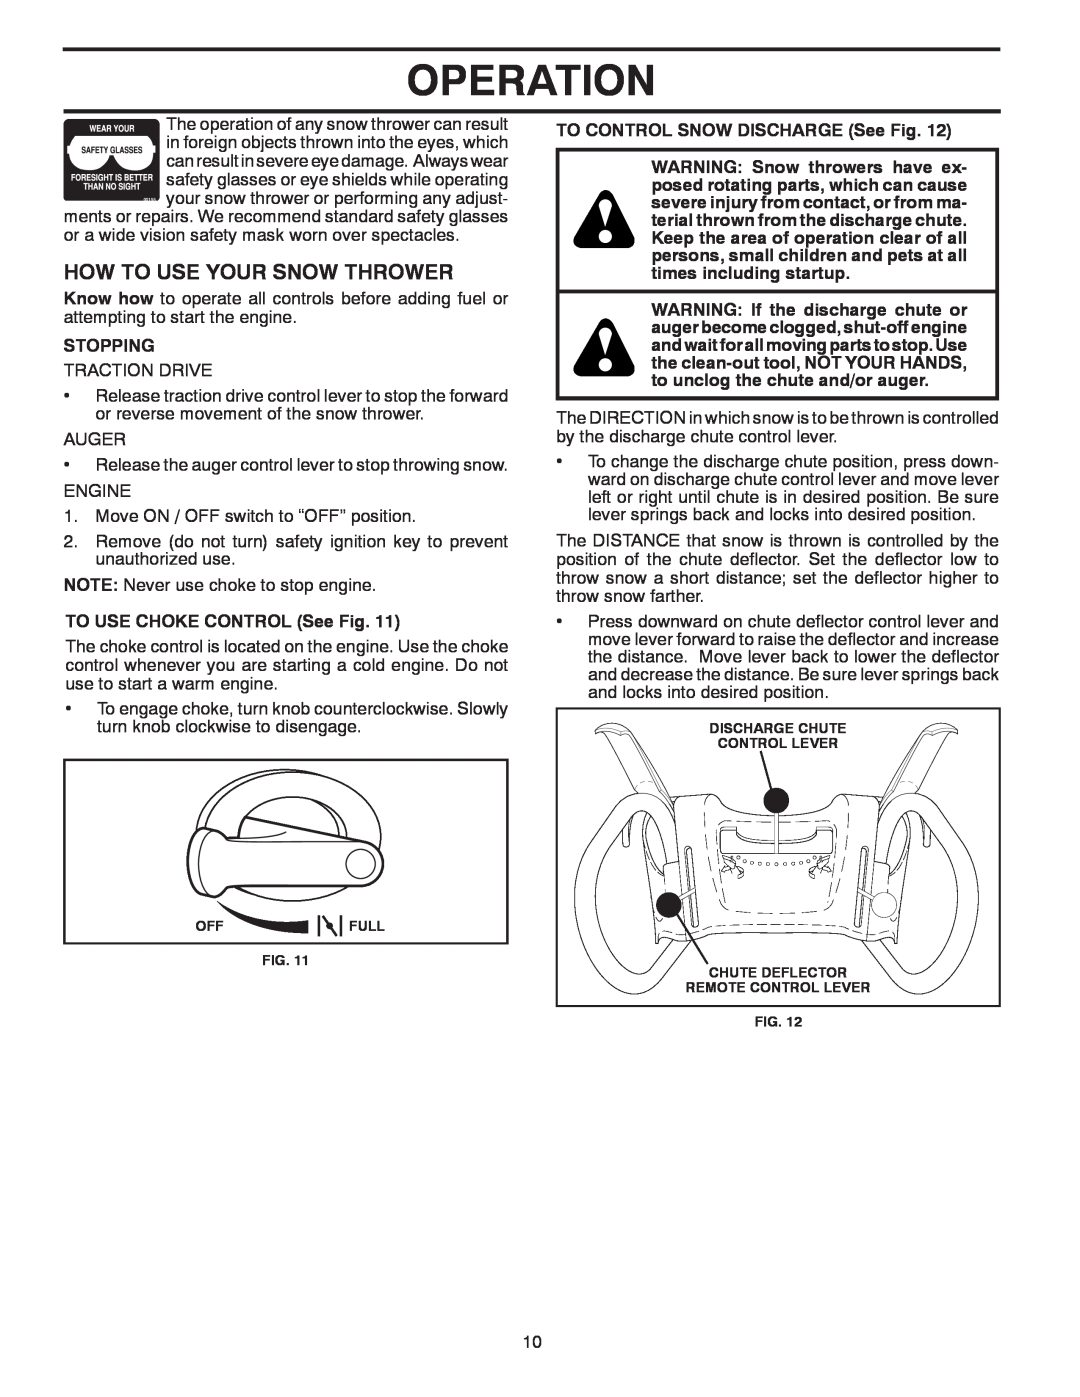 Poulan 428695, 96192003001 owner manual How To Use Your Snow Thrower, Operation, Stopping, TO USE CHOKE CONTROL See Fig 